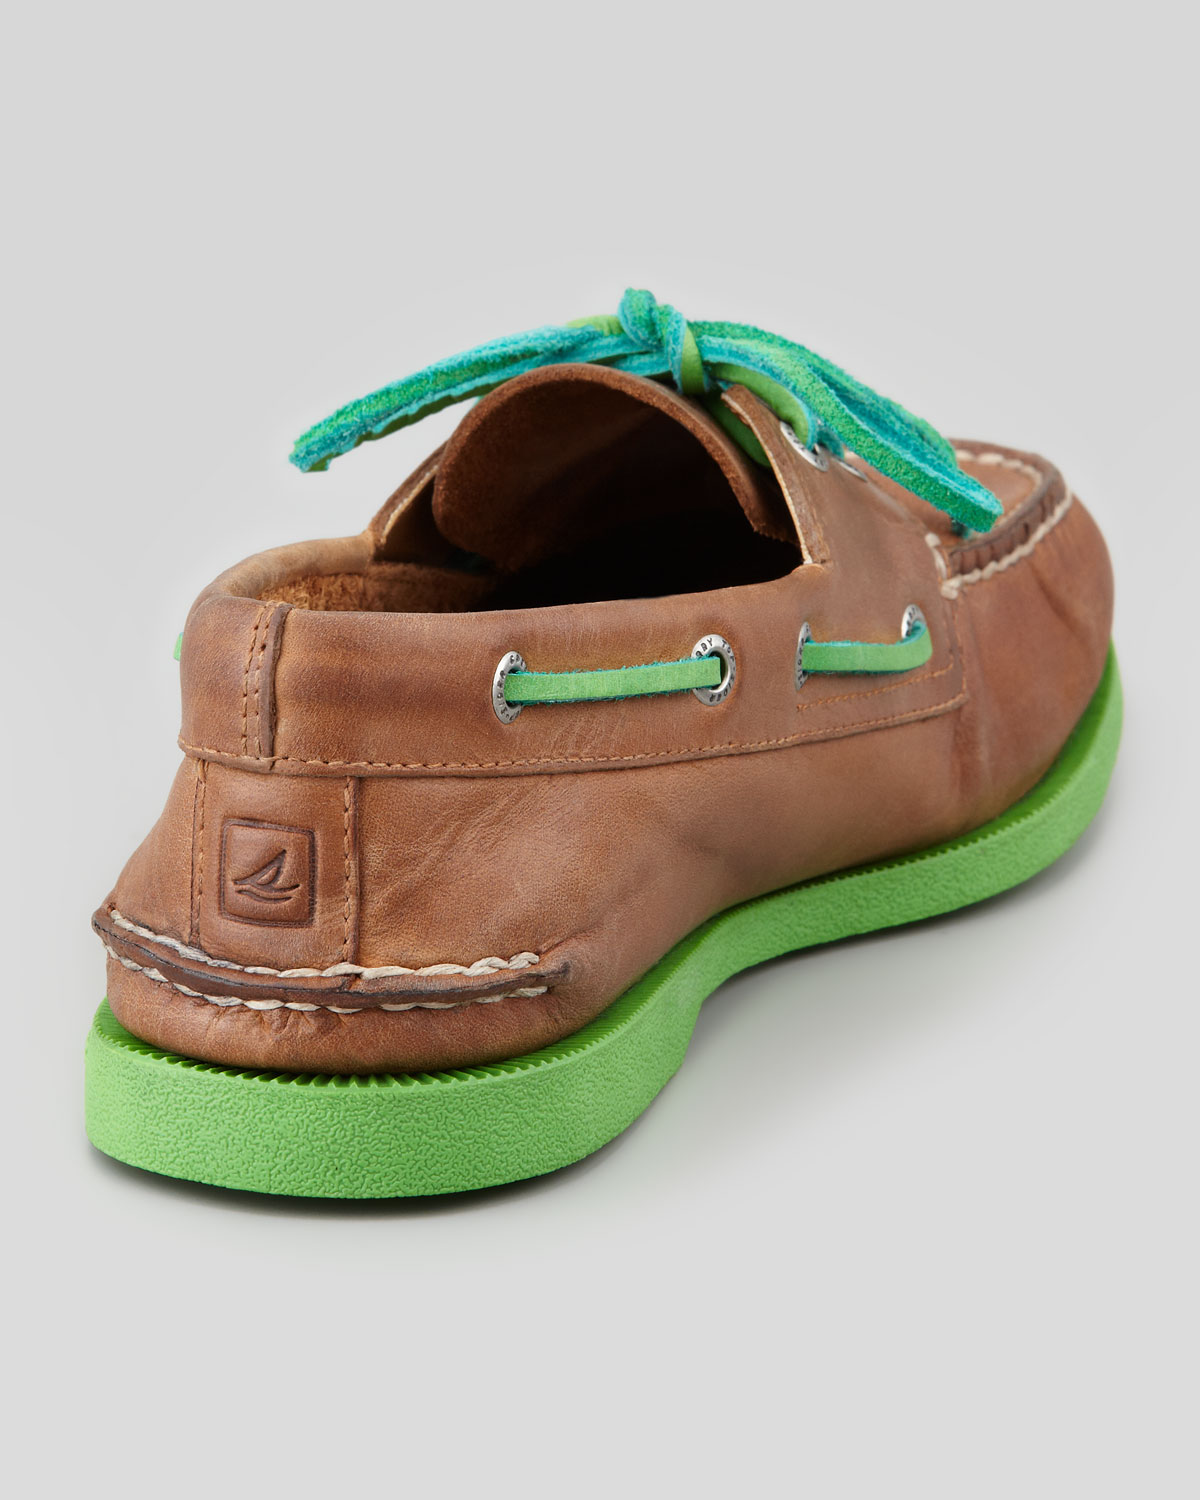 Sperry Top-Sider Authentic Original 